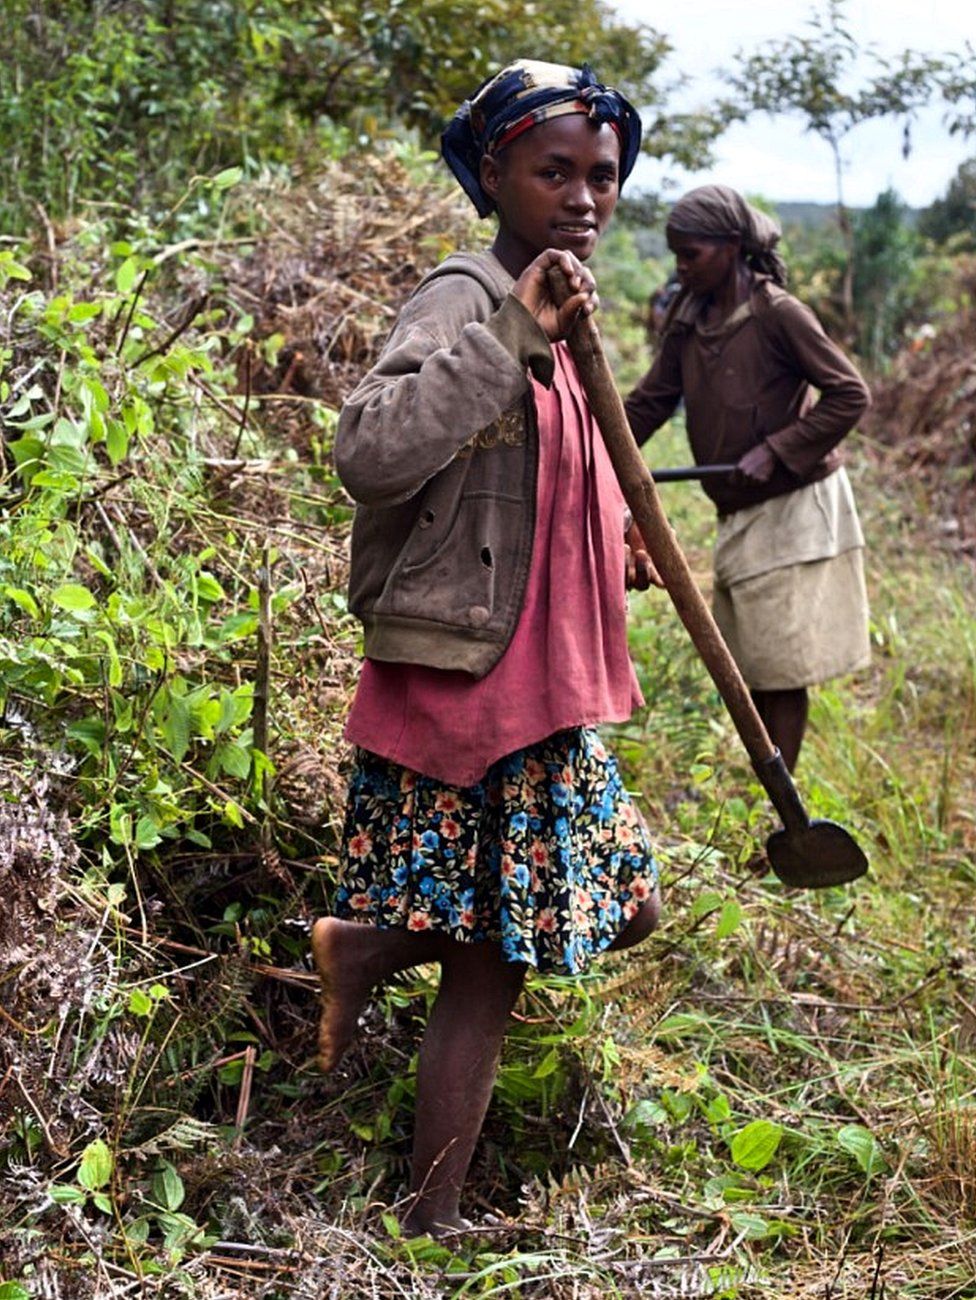 Village residents are employed in forest restoration projects